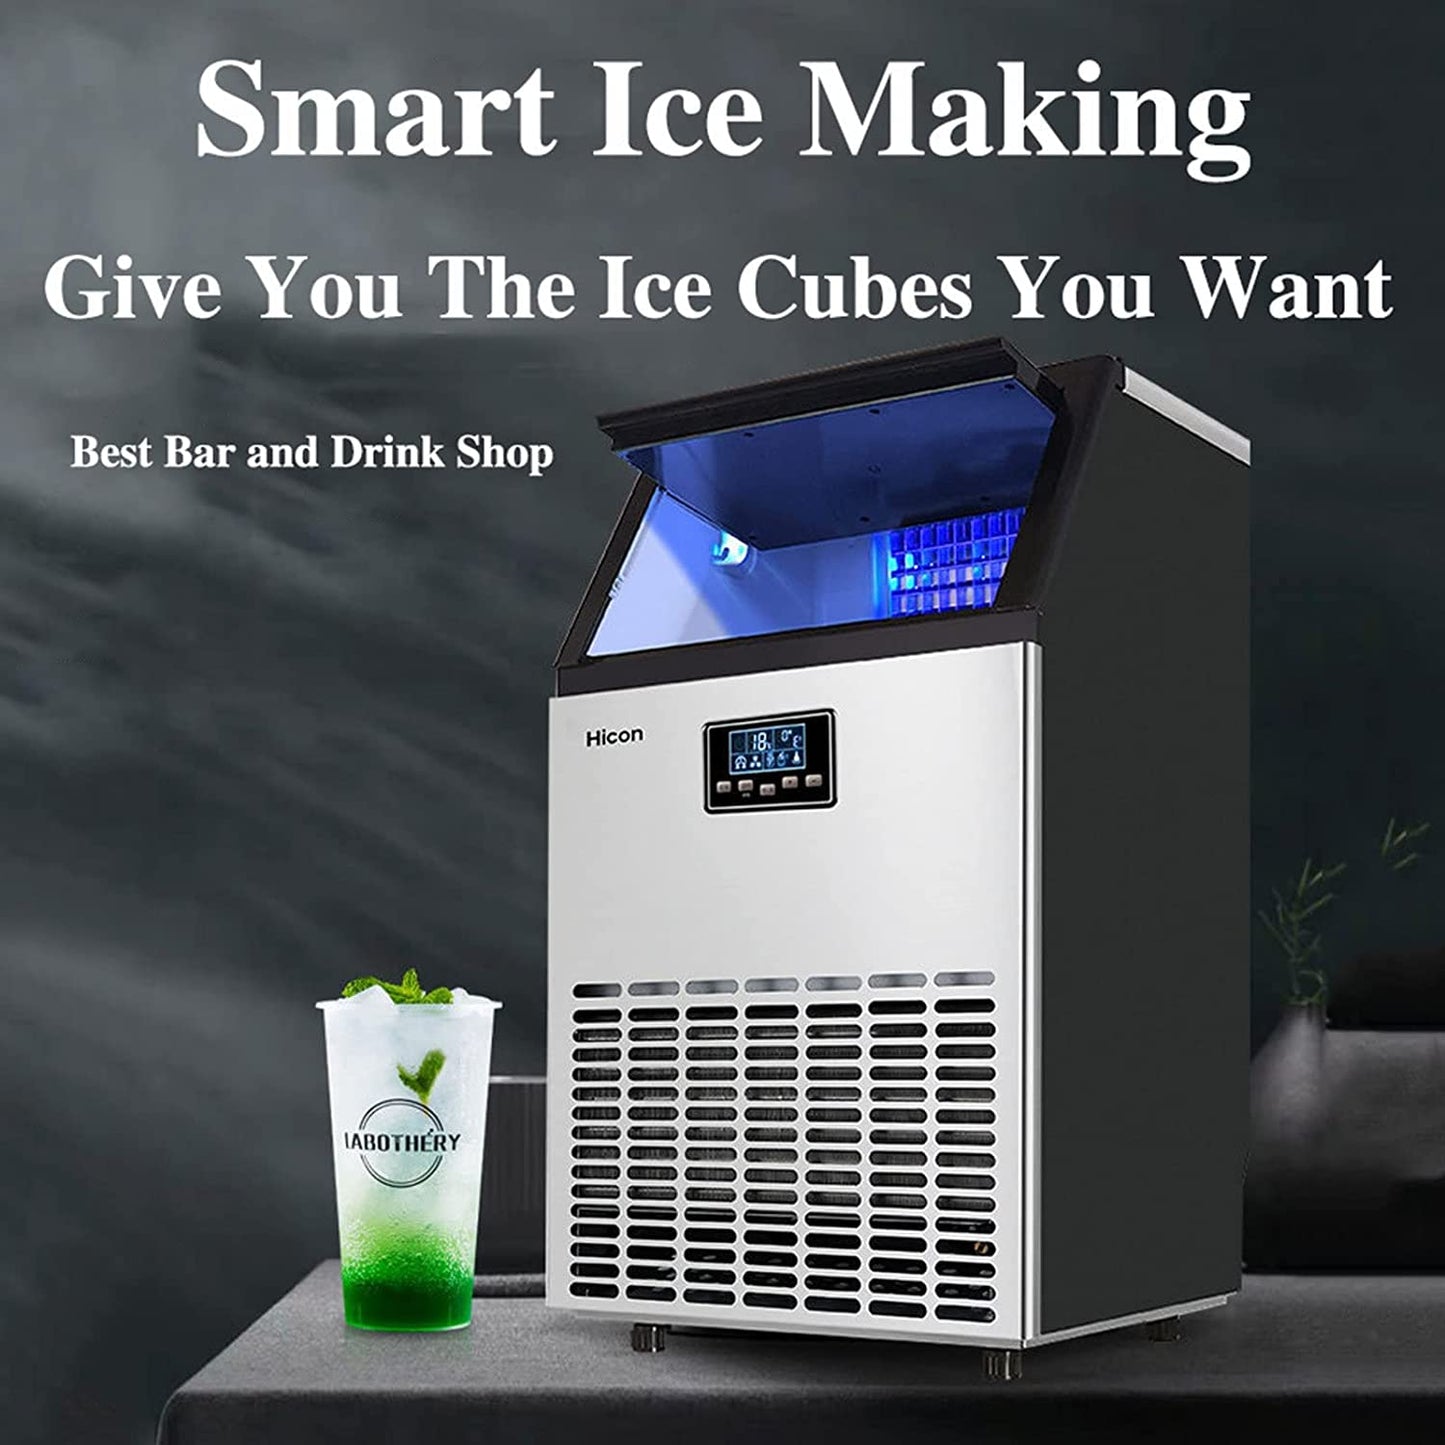 COOLBABY YLY2054 Premium Stainless Steel Ice Maker: Smart, Safe, and Efficient - COOLBABY